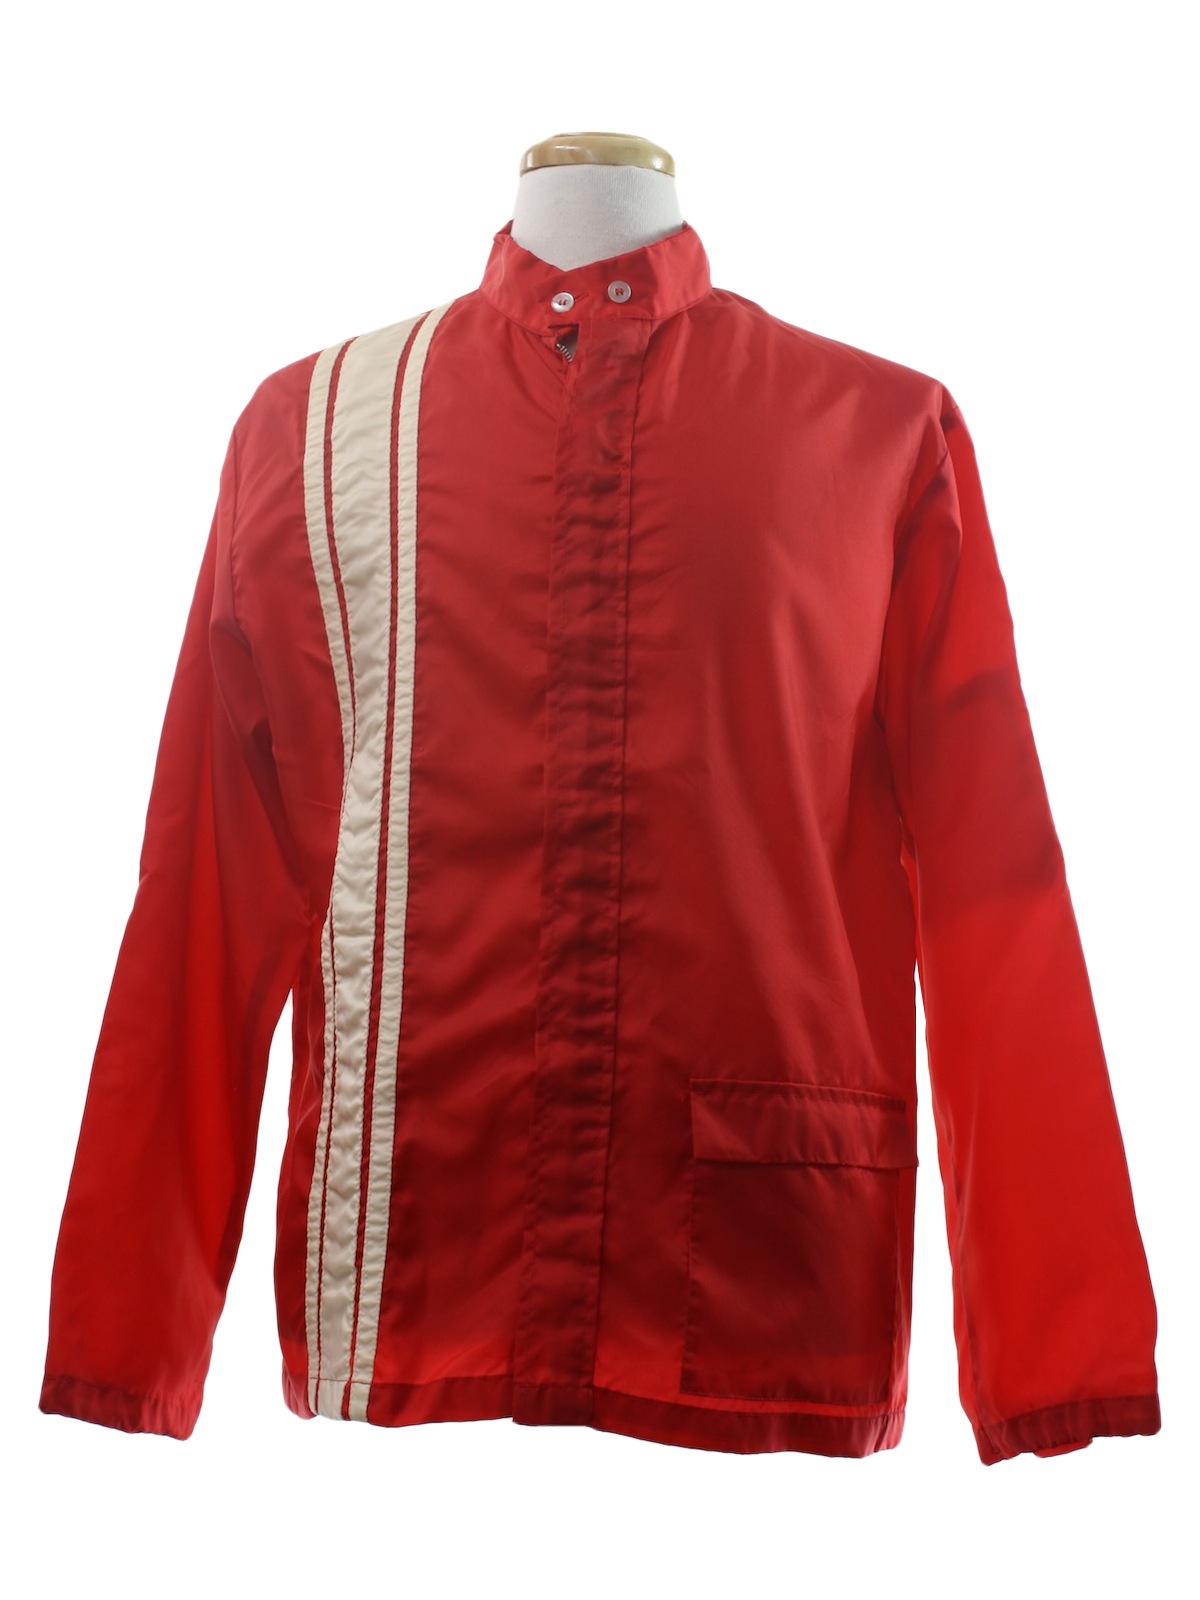 Seventies Vintage Jacket: 70s -Swingster- Mens red and white nylon ...